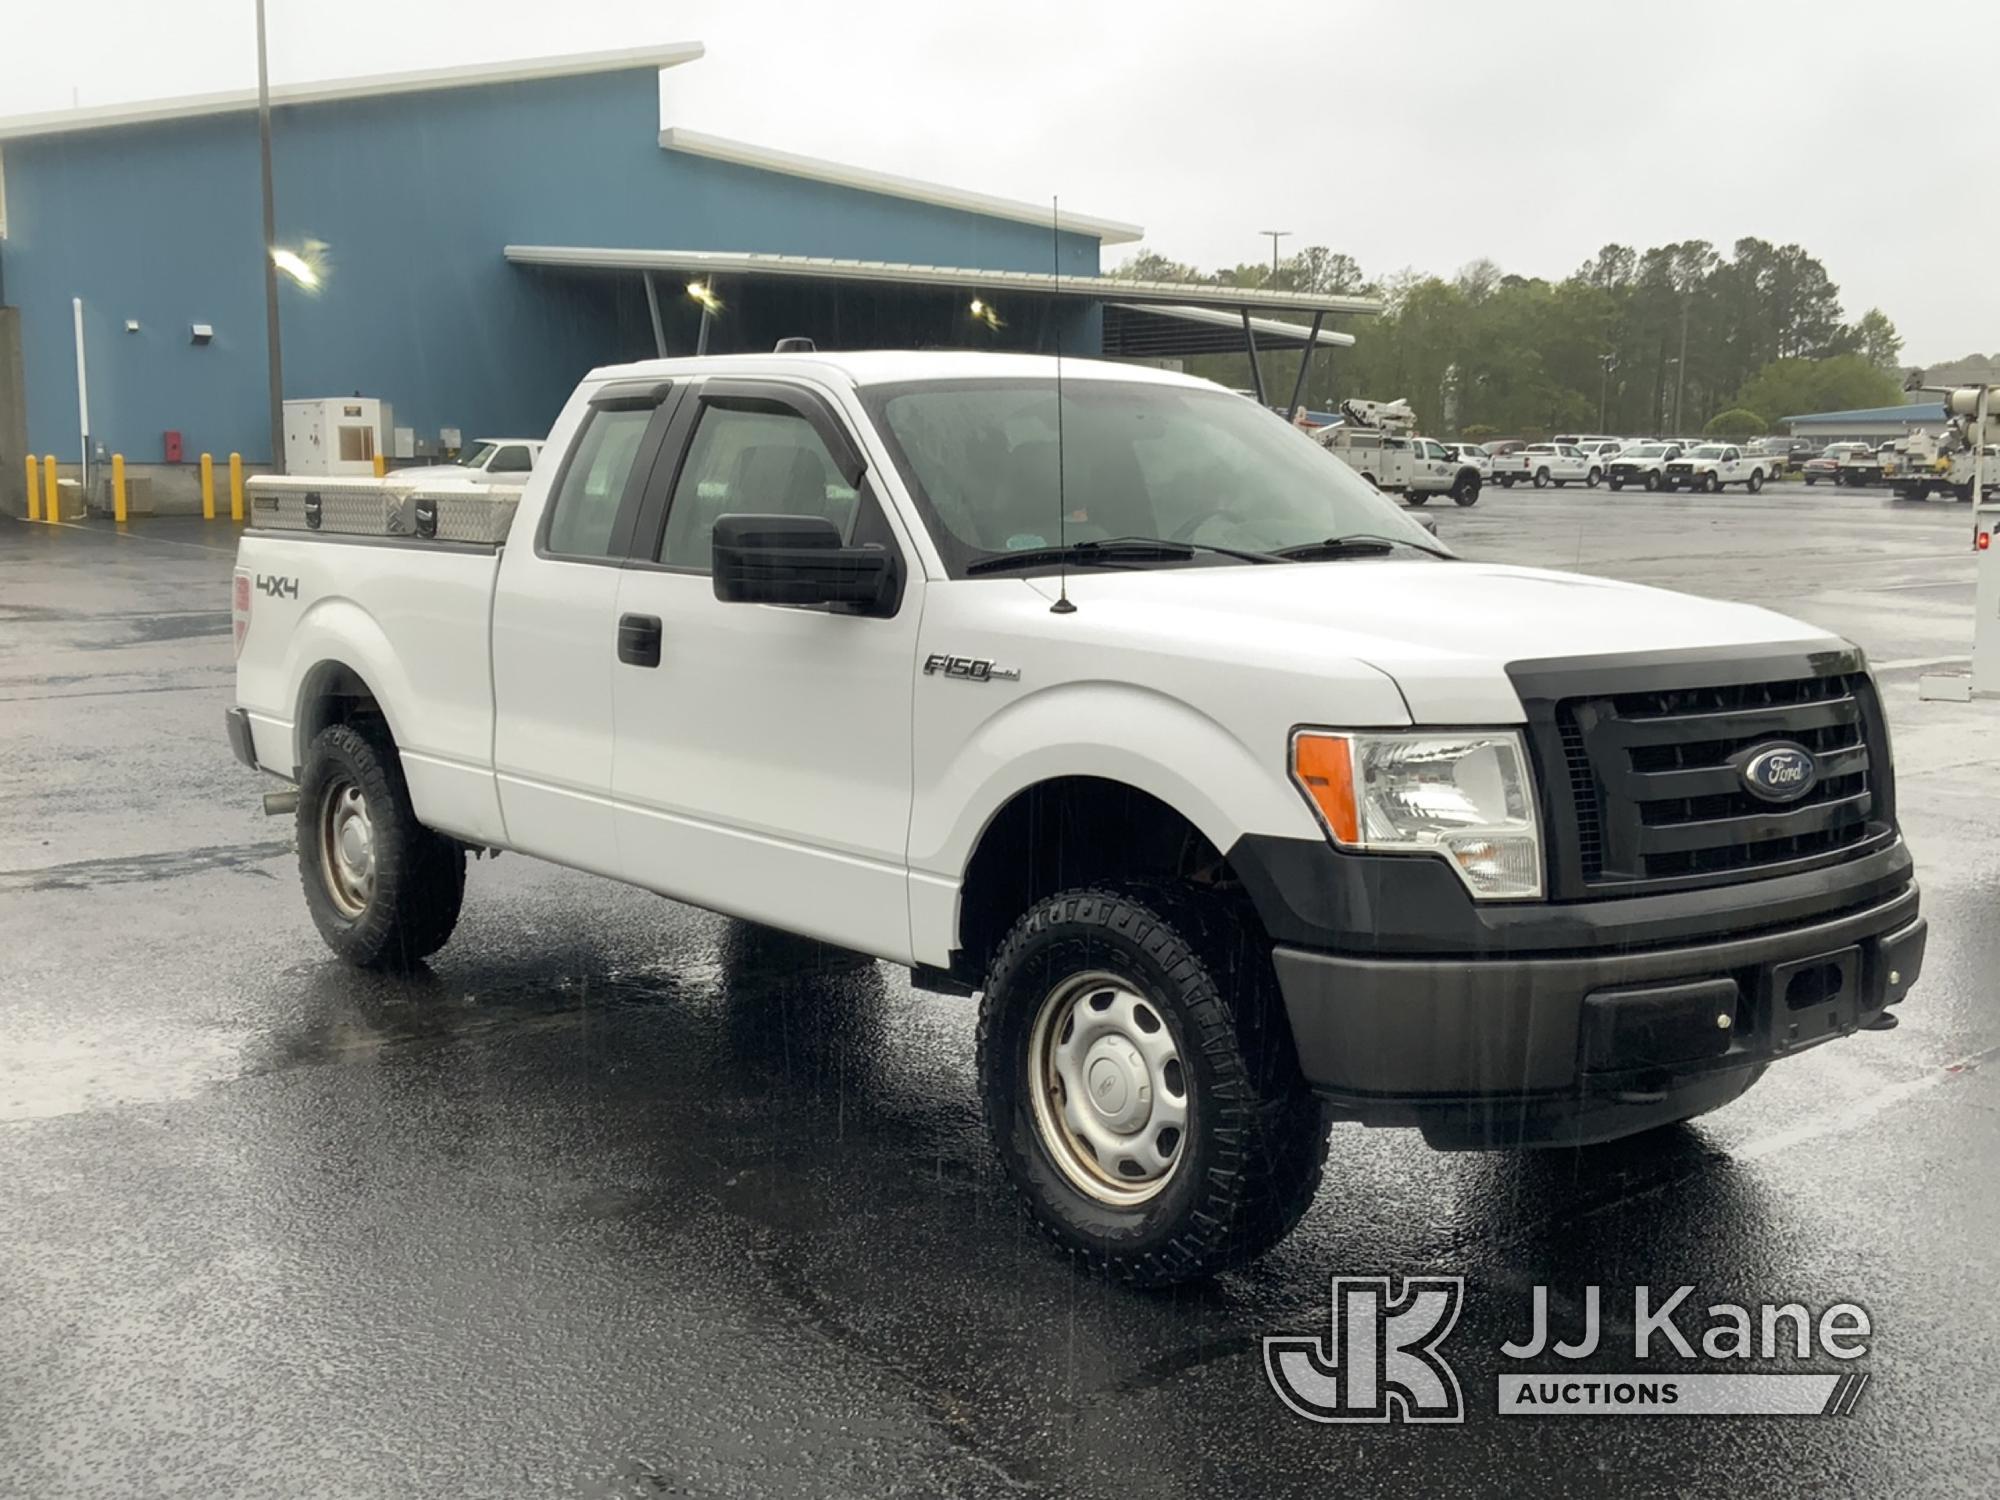 (Supply, NC) 2011 Ford F150 4x4 Extended-Cab Pickup Truck, Co-Op Unit Runs, Moves